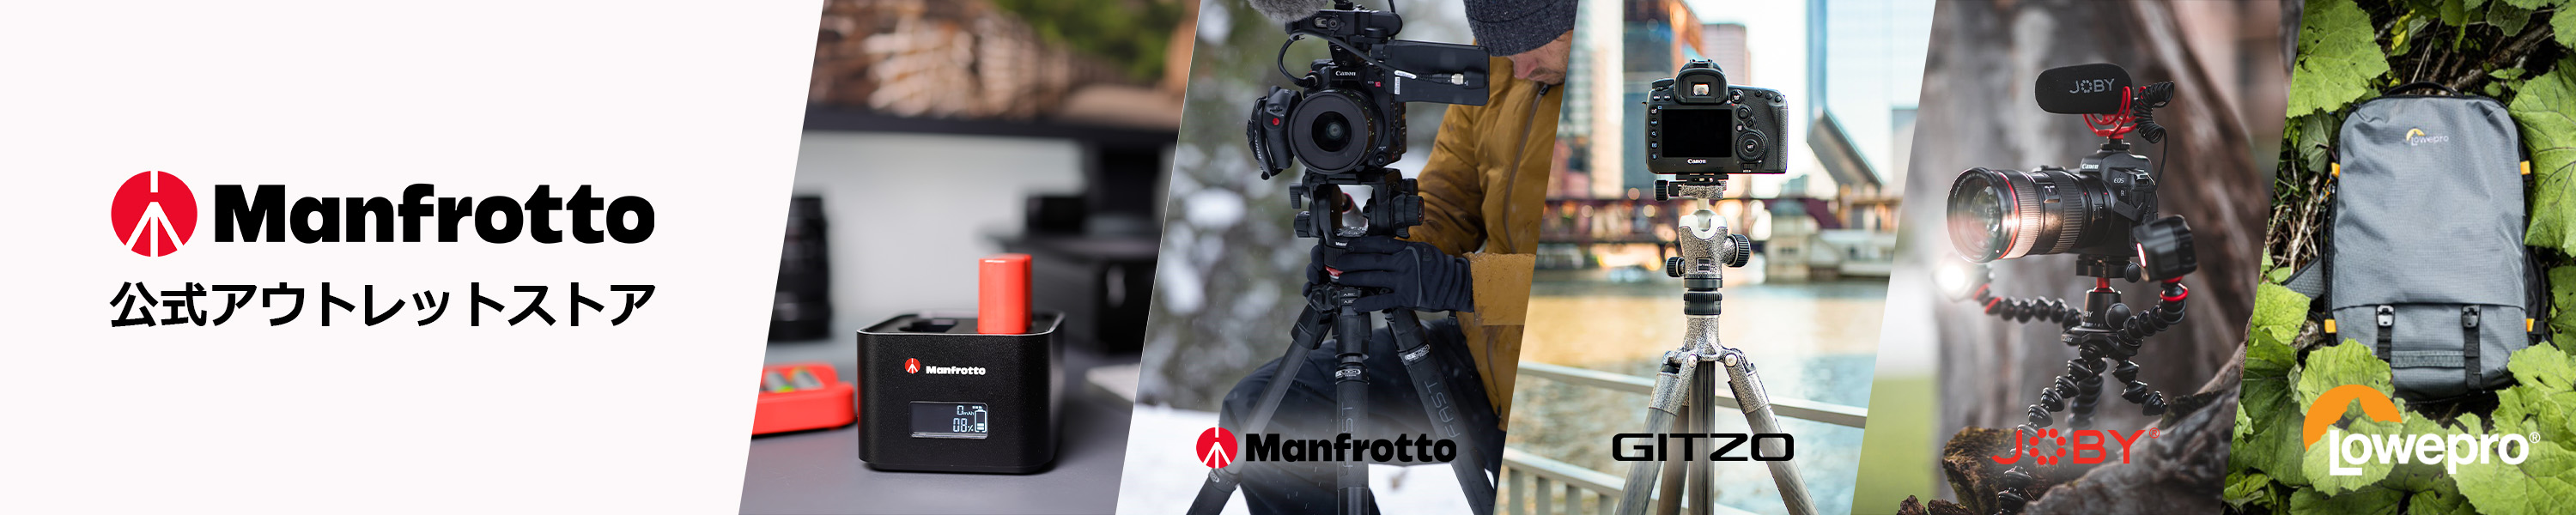 Manfrotto Outlet Store Yahoo!店 ヘッダー画像